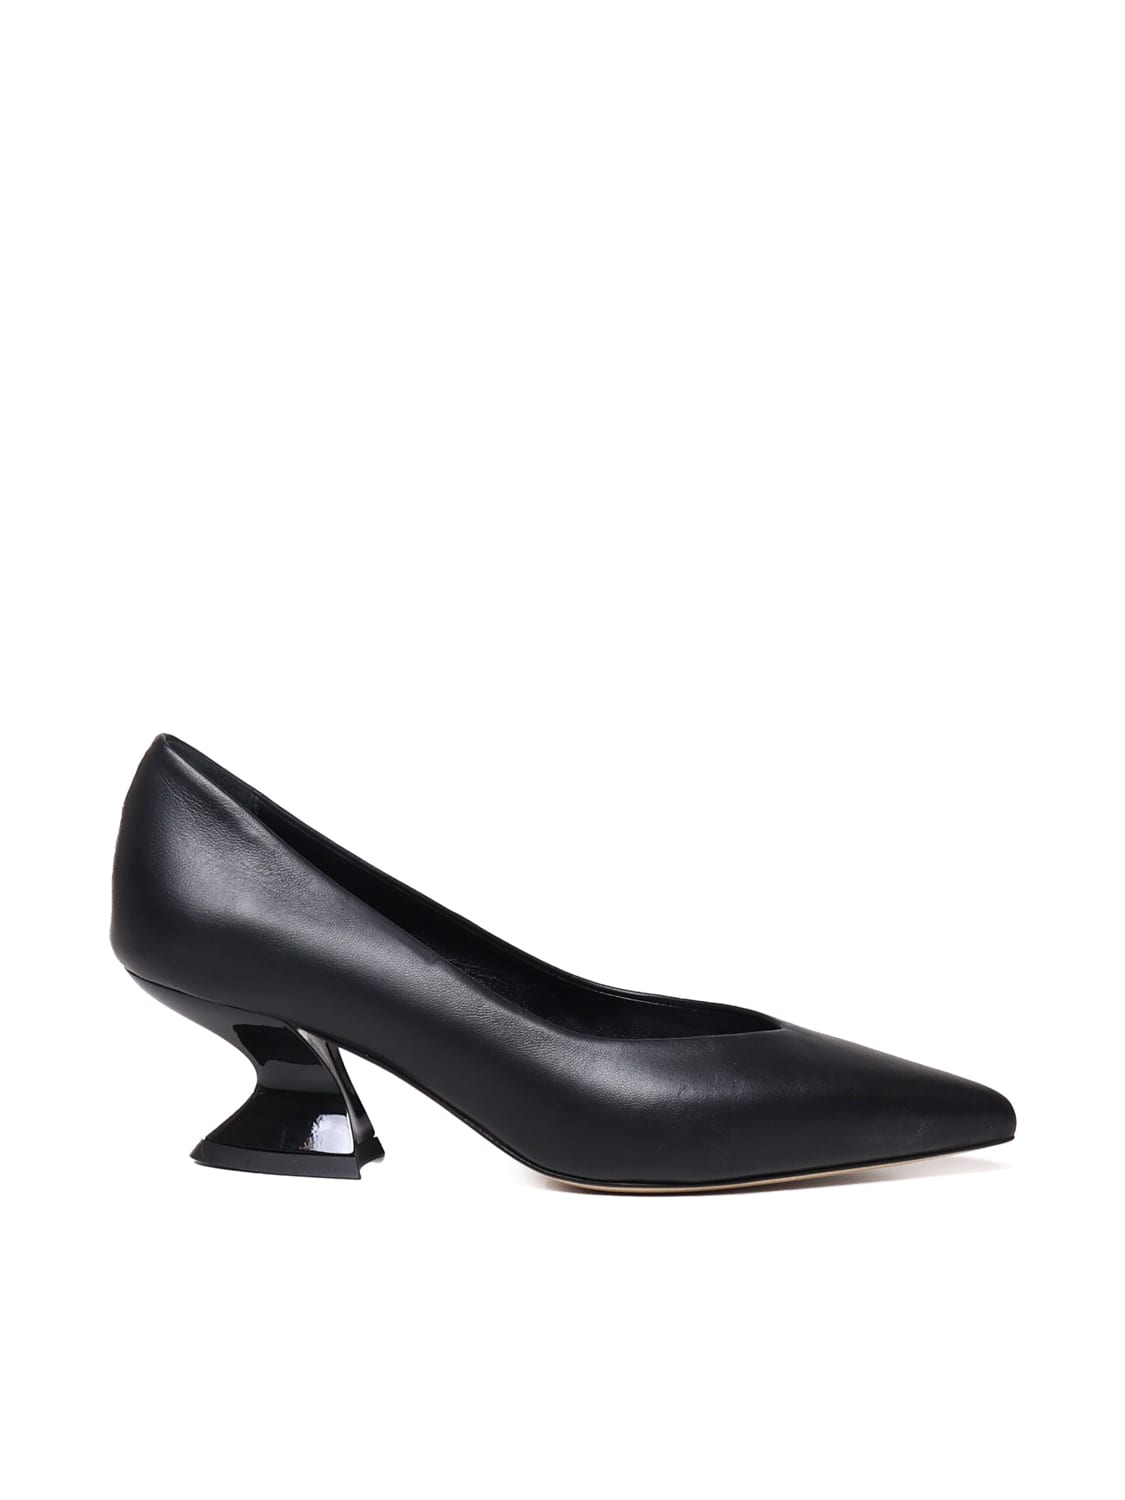 Alchimia Leather Pumps With Wide Heel In Black